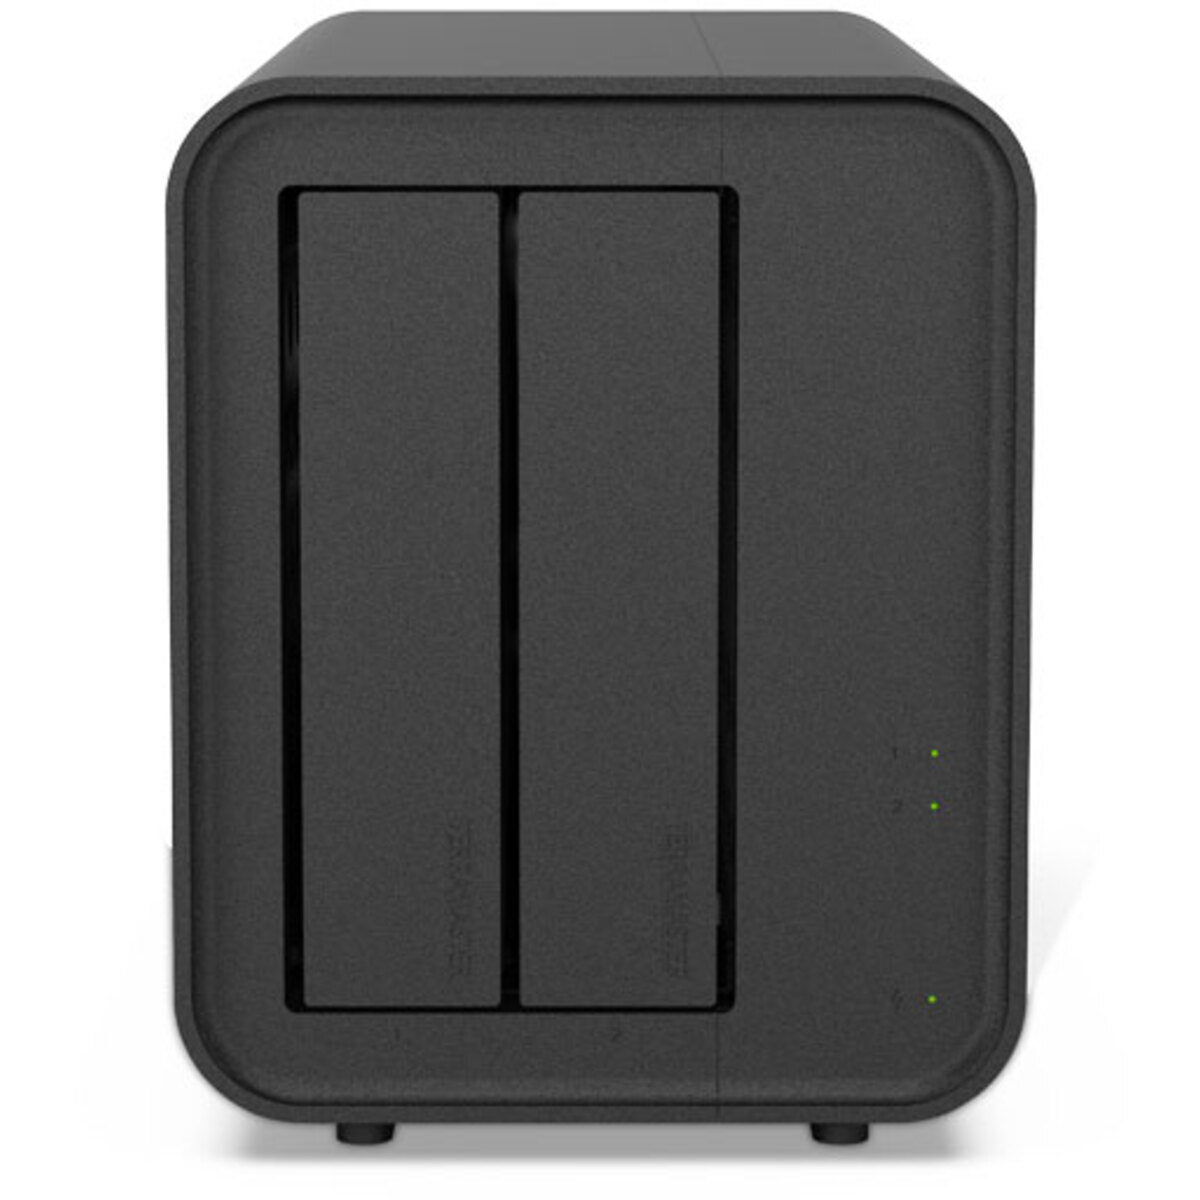 TerraMaster F2-424 8tb 2-Bay Desktop Multimedia / Power User / Business NAS - Network Attached Storage Device 1x8tb Seagate EXOS 7E10 ST8000NM017B 3.5 7200rpm SATA 6Gb/s HDD ENTERPRISE Class Drives Installed - Burn-In Tested F2-424